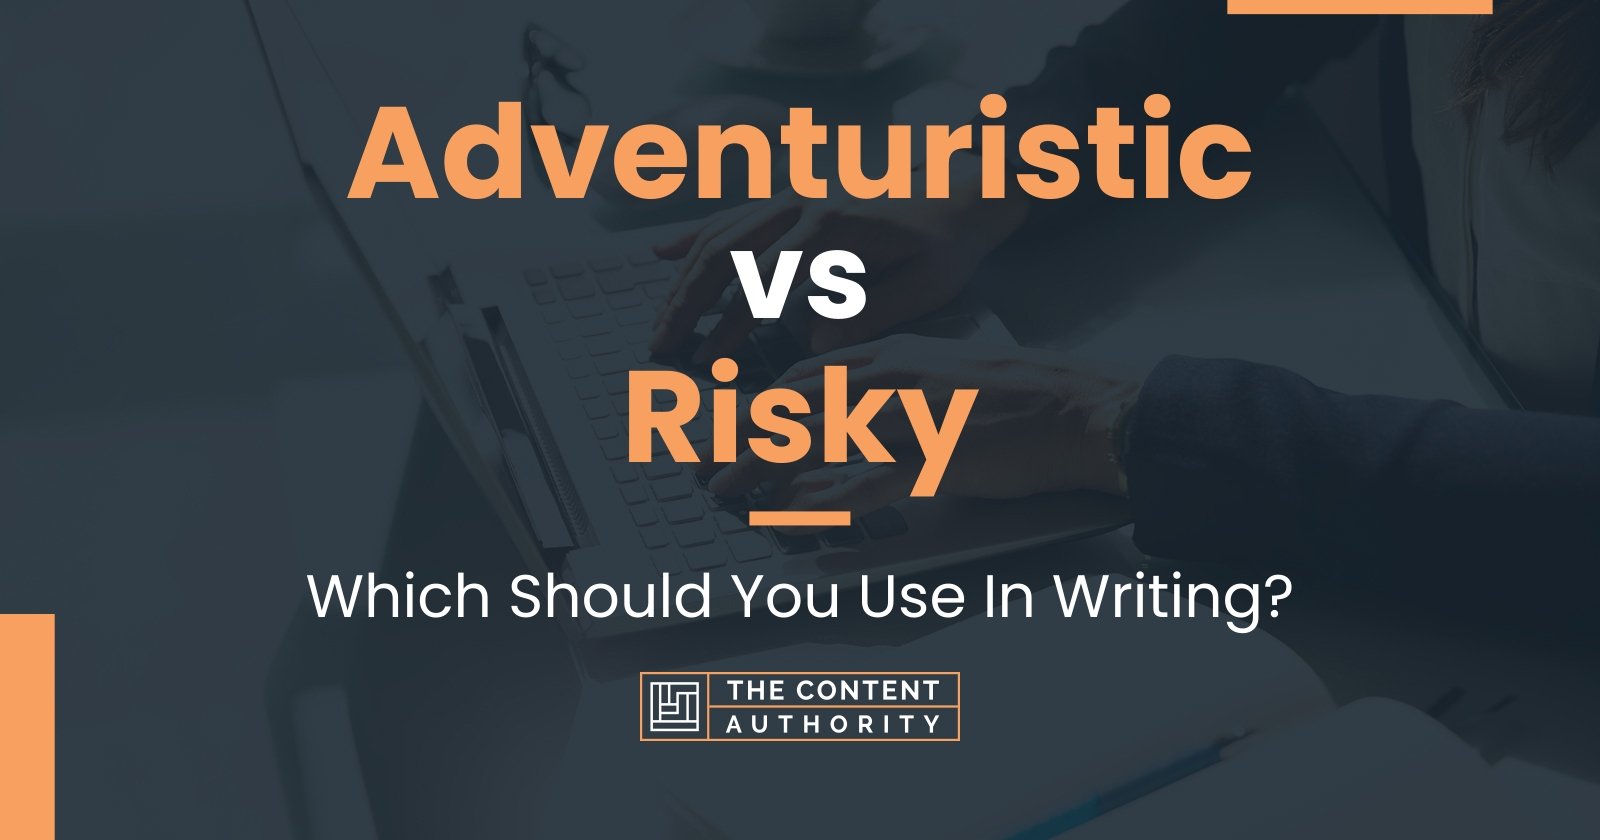 Adventuristic vs Risky: Which Should You Use In Writing?